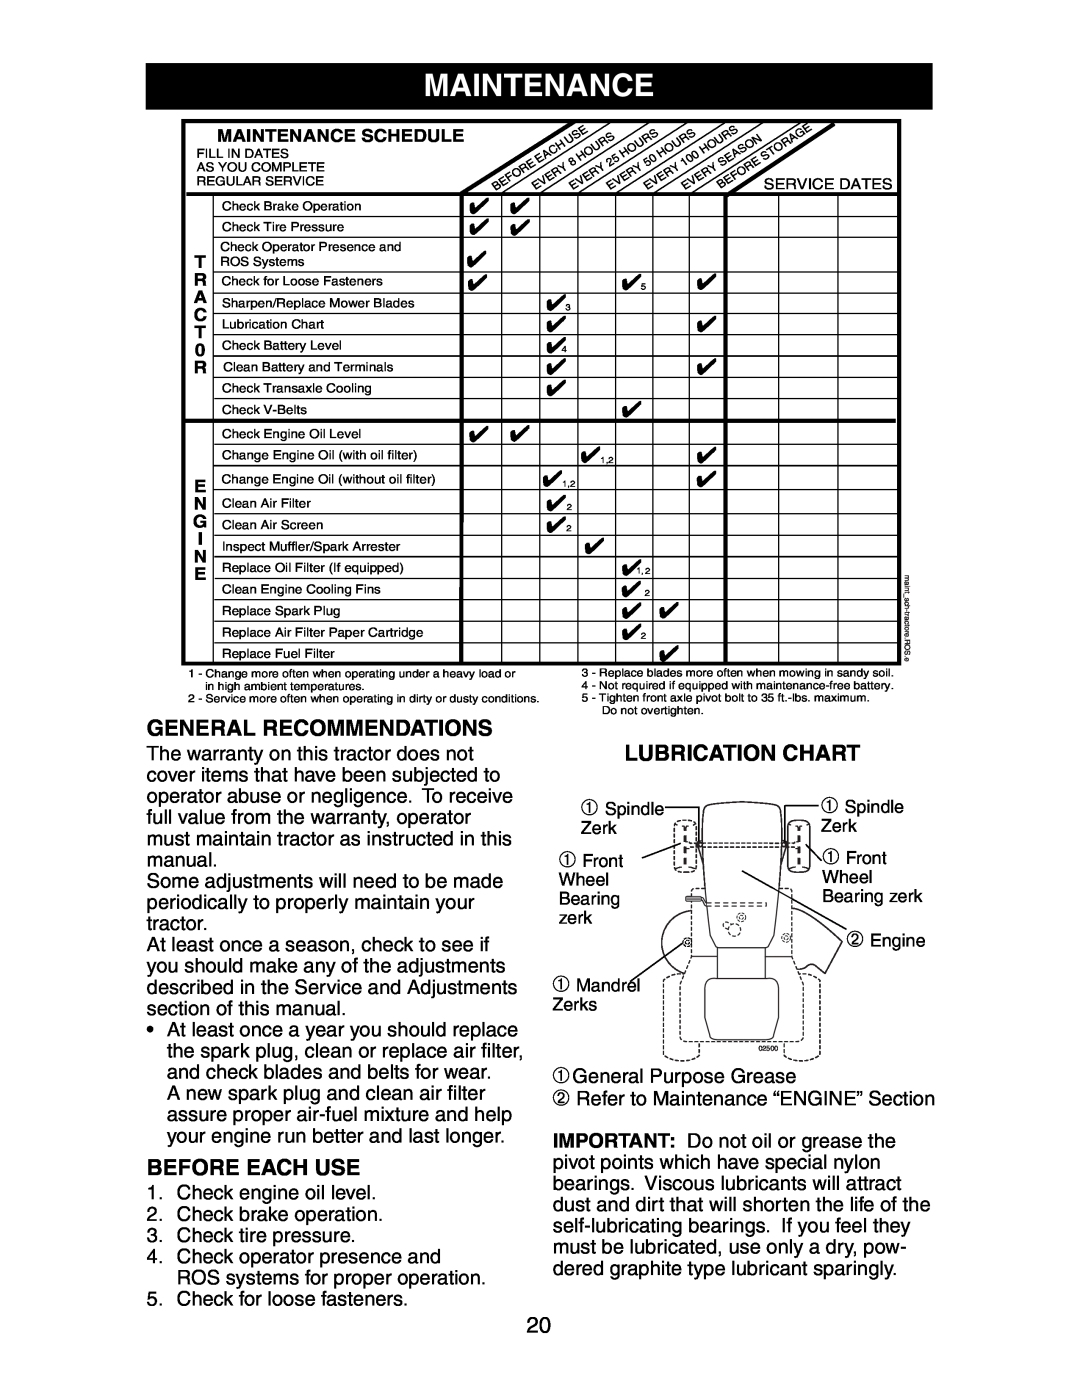 Poulan SP24H48YT manual Maintenance, General Recommendations, Before Each Use, Lubrication Chart 